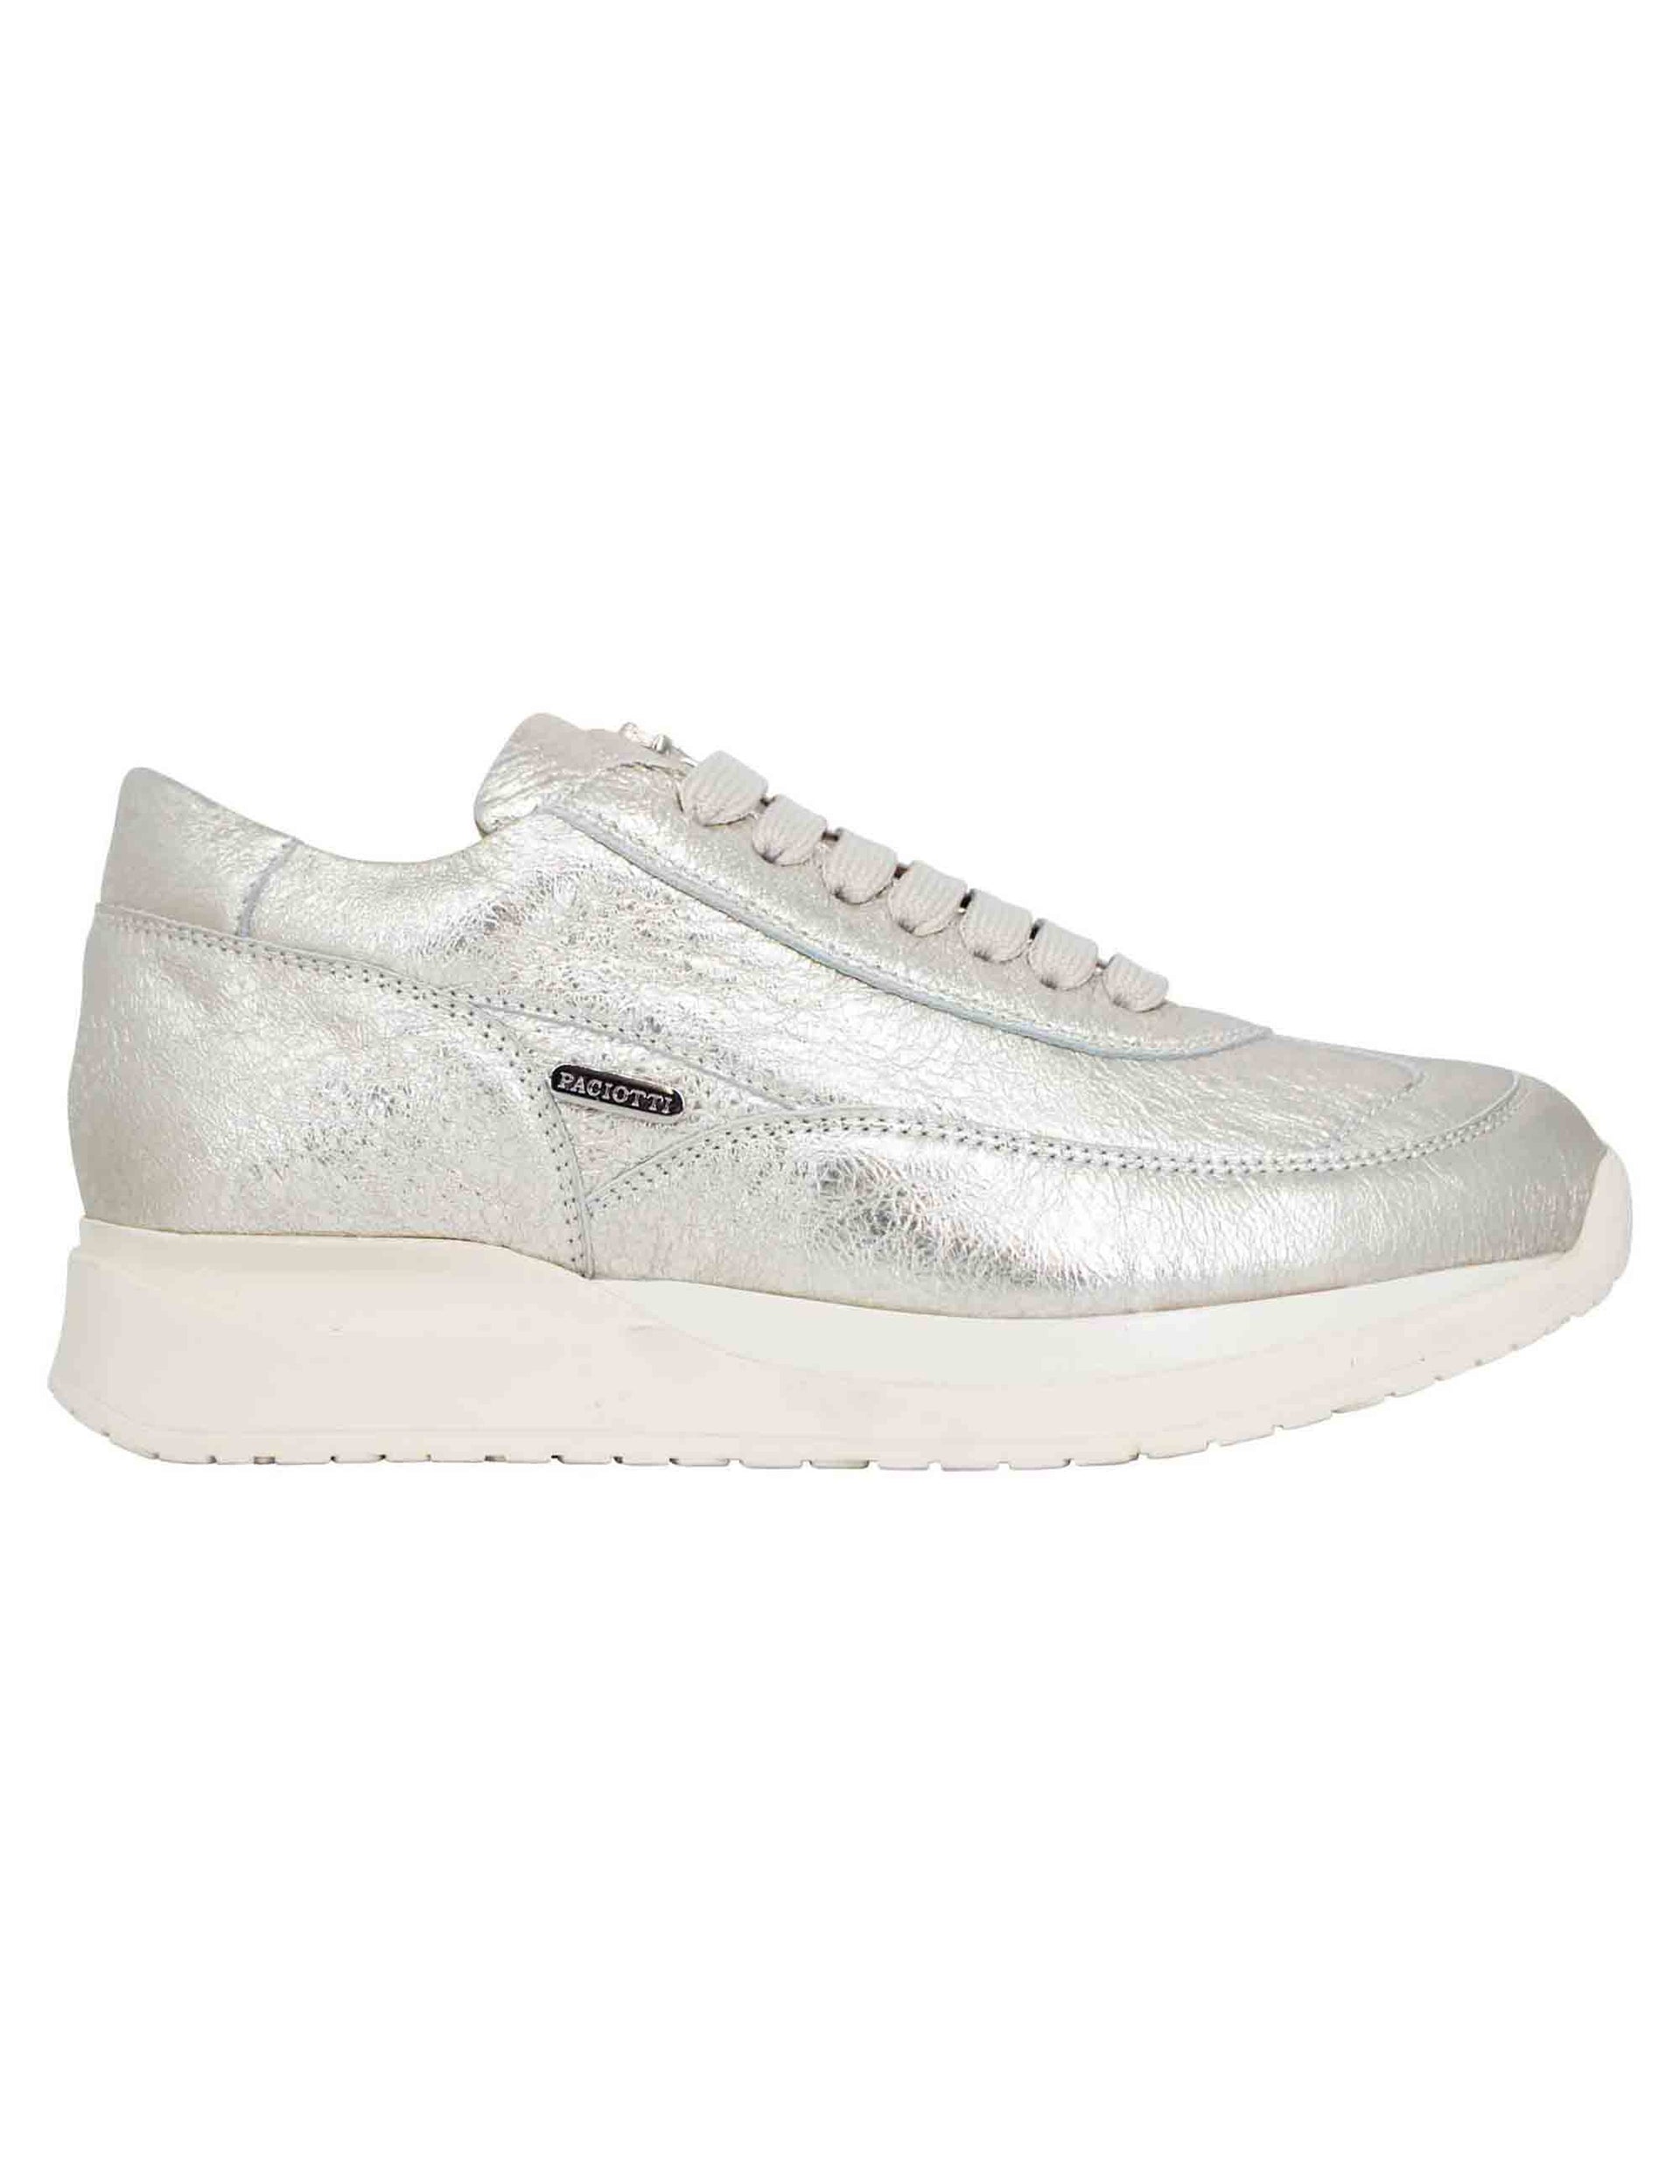 Women's sneakers in platinum laminated leather